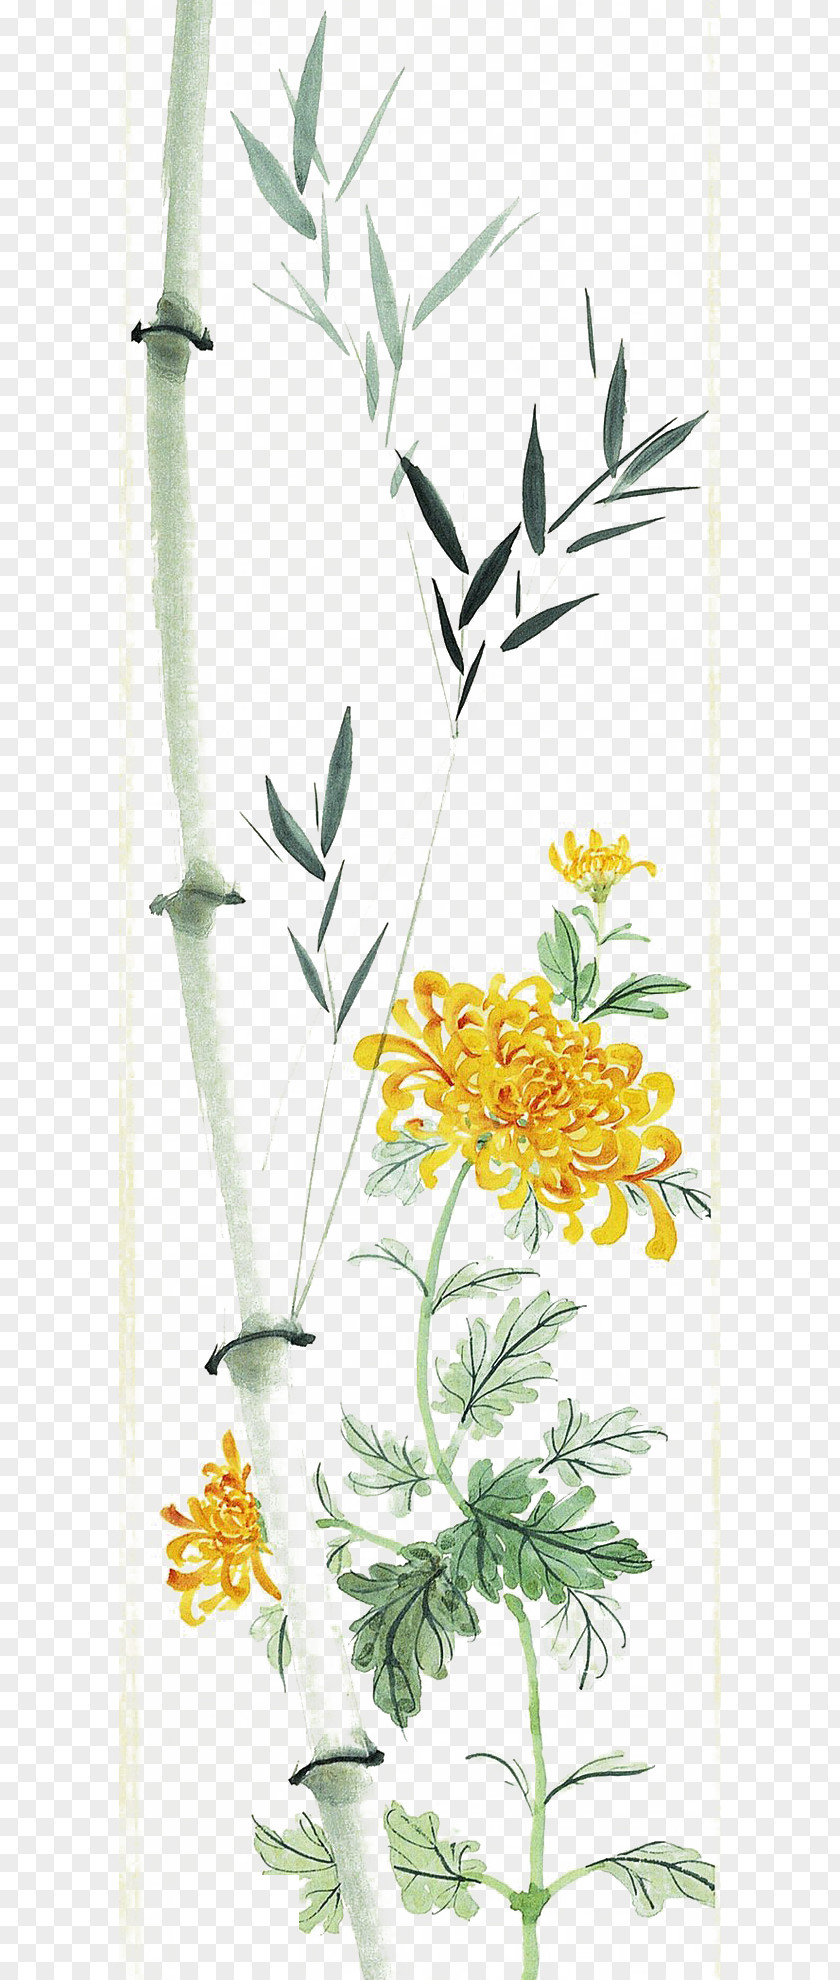 Bamboo Leaves And Chrysanthemums Chrysanthemum Chinese Painting Leaf PNG